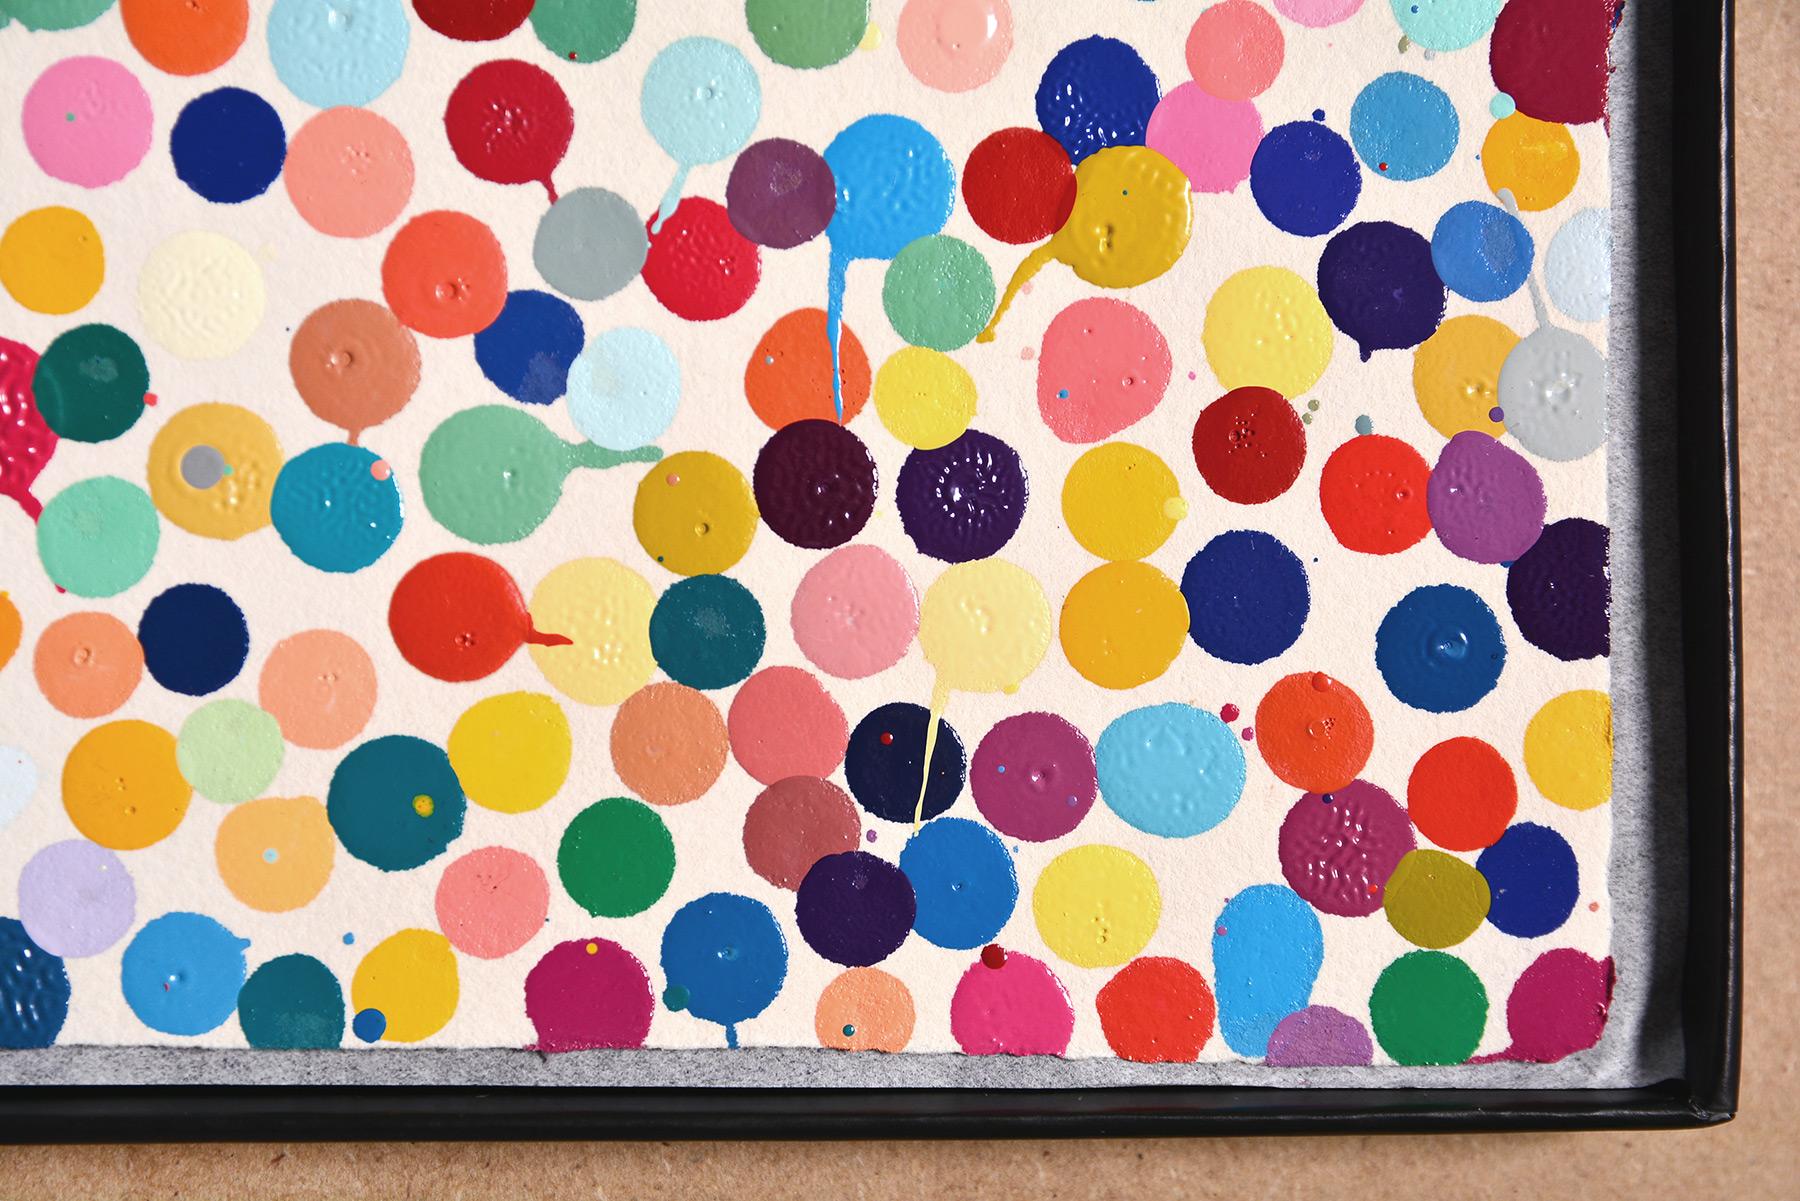 DAMIEN HIRST - THE CURRENCY. Original work The Currency Project. Dots. Colors 5